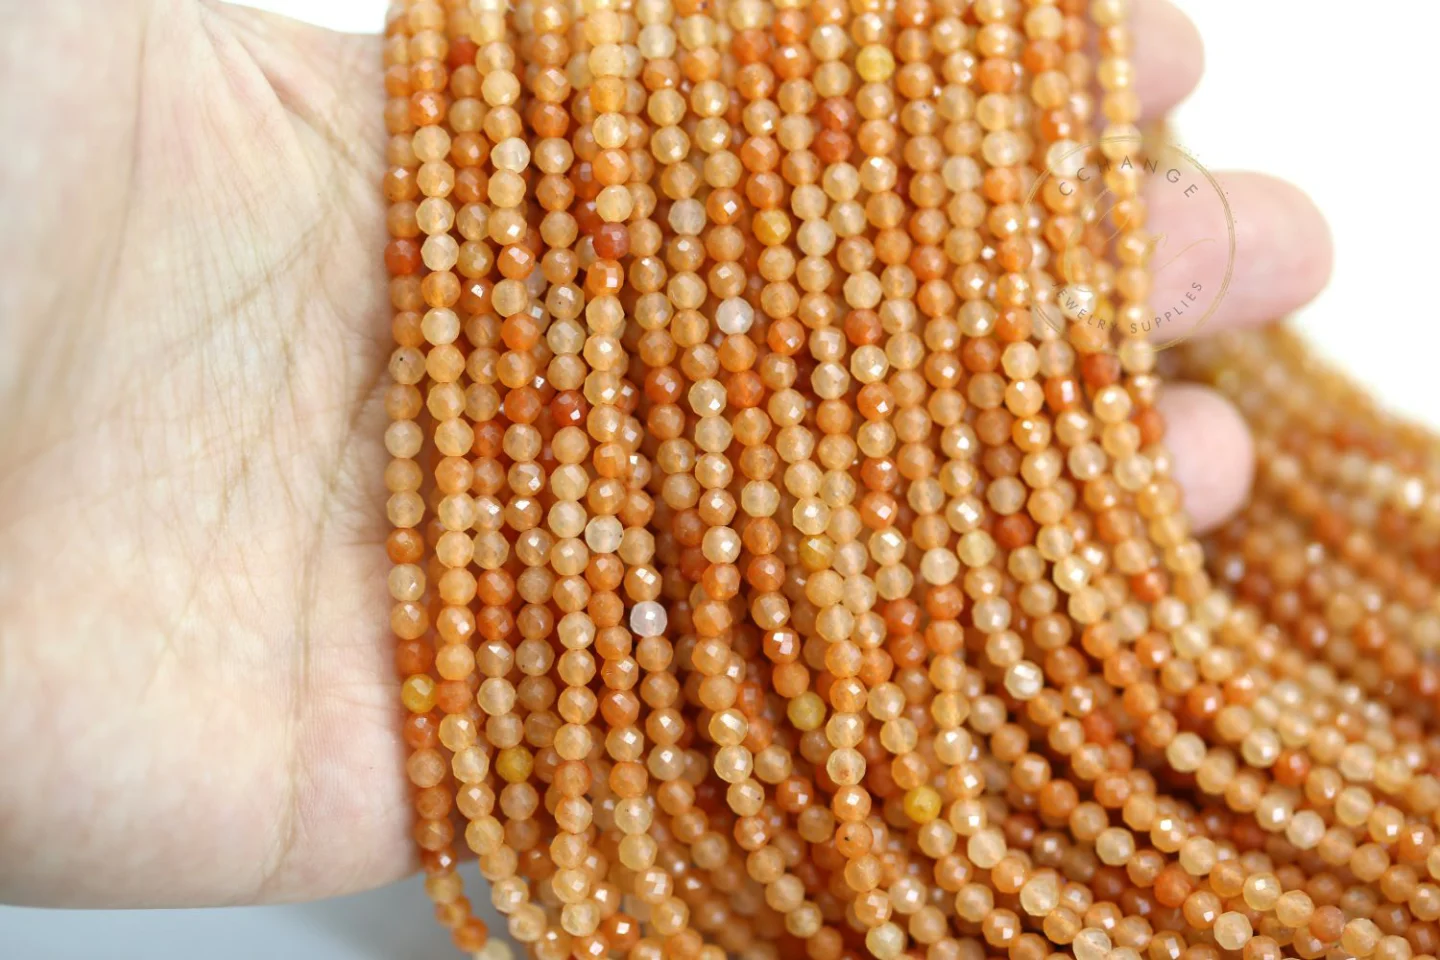 3mm-round-faceted-red-aventurine-beads.